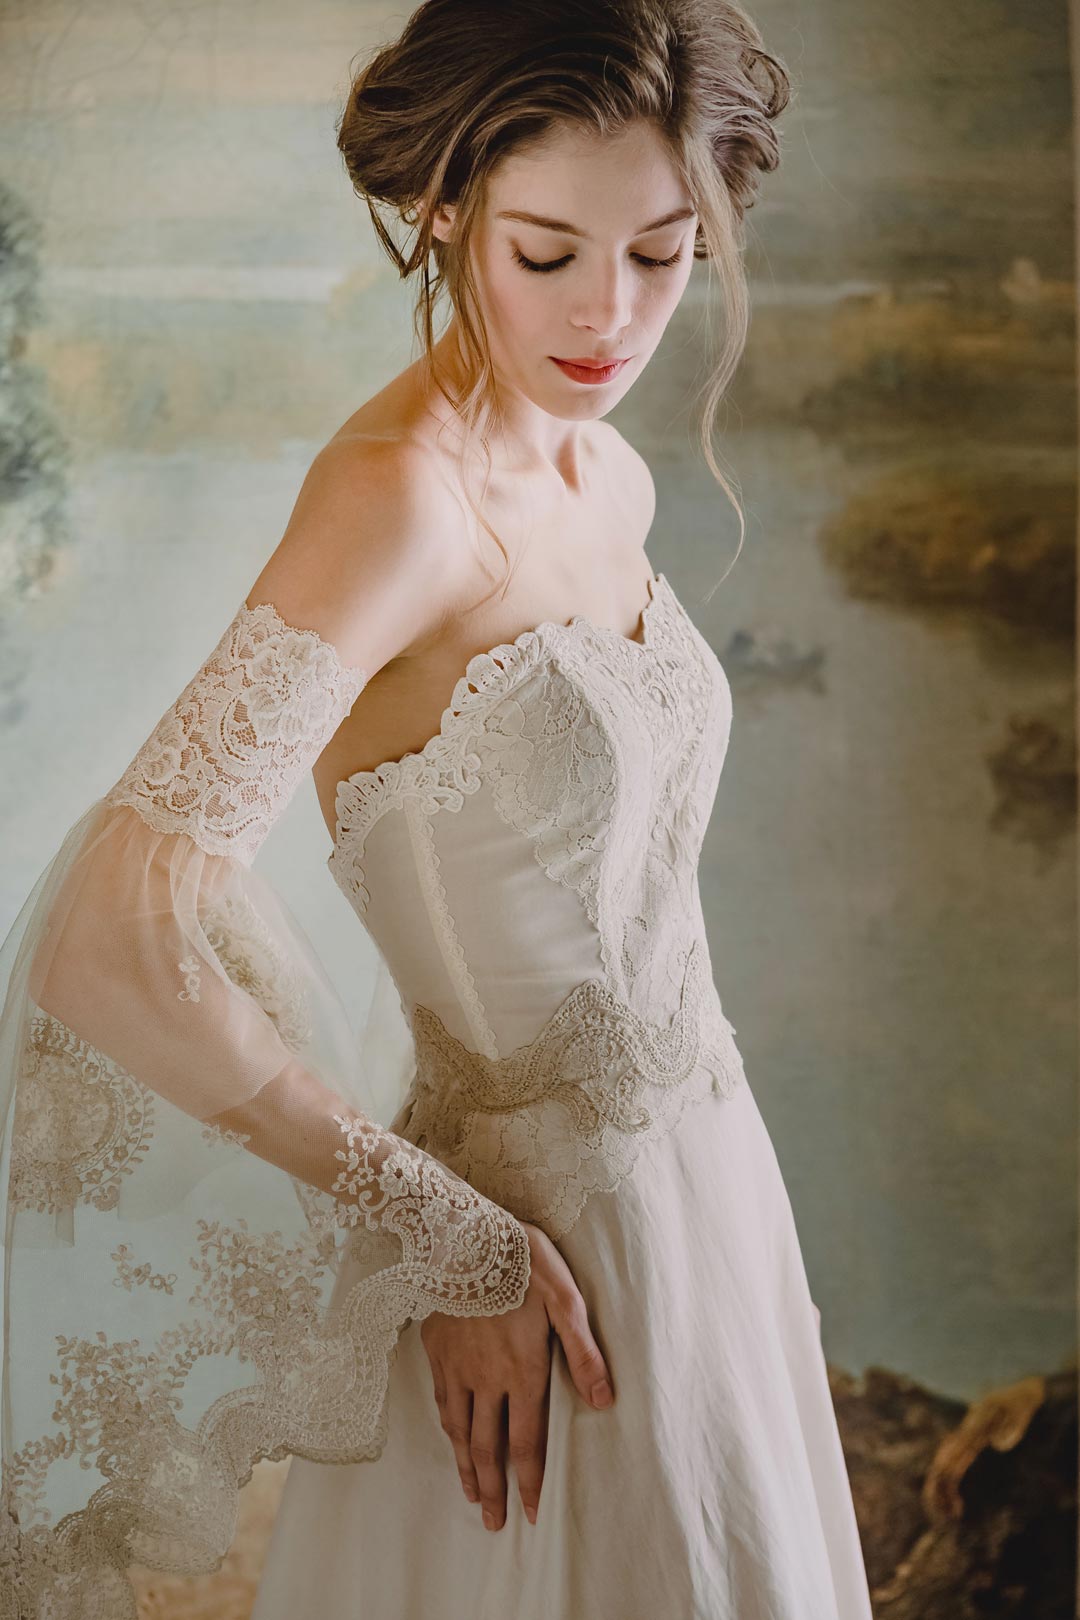 Marie Couture Wedding Dress with elaborate lace sleeves